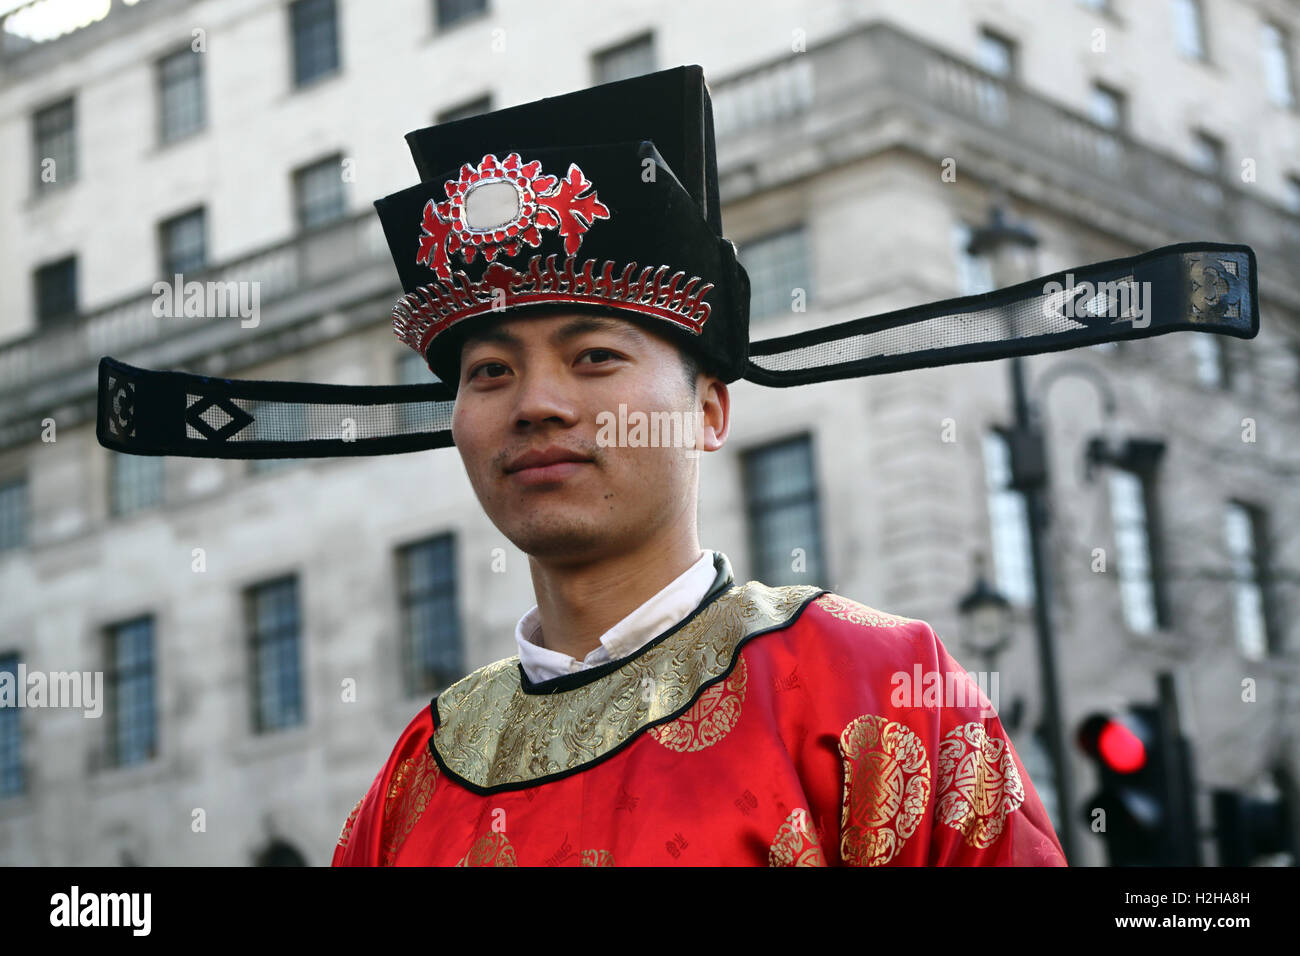 Man dressed in traditional Chinese costume during the Chinese New Year Parade, London, UK. Stock Photo